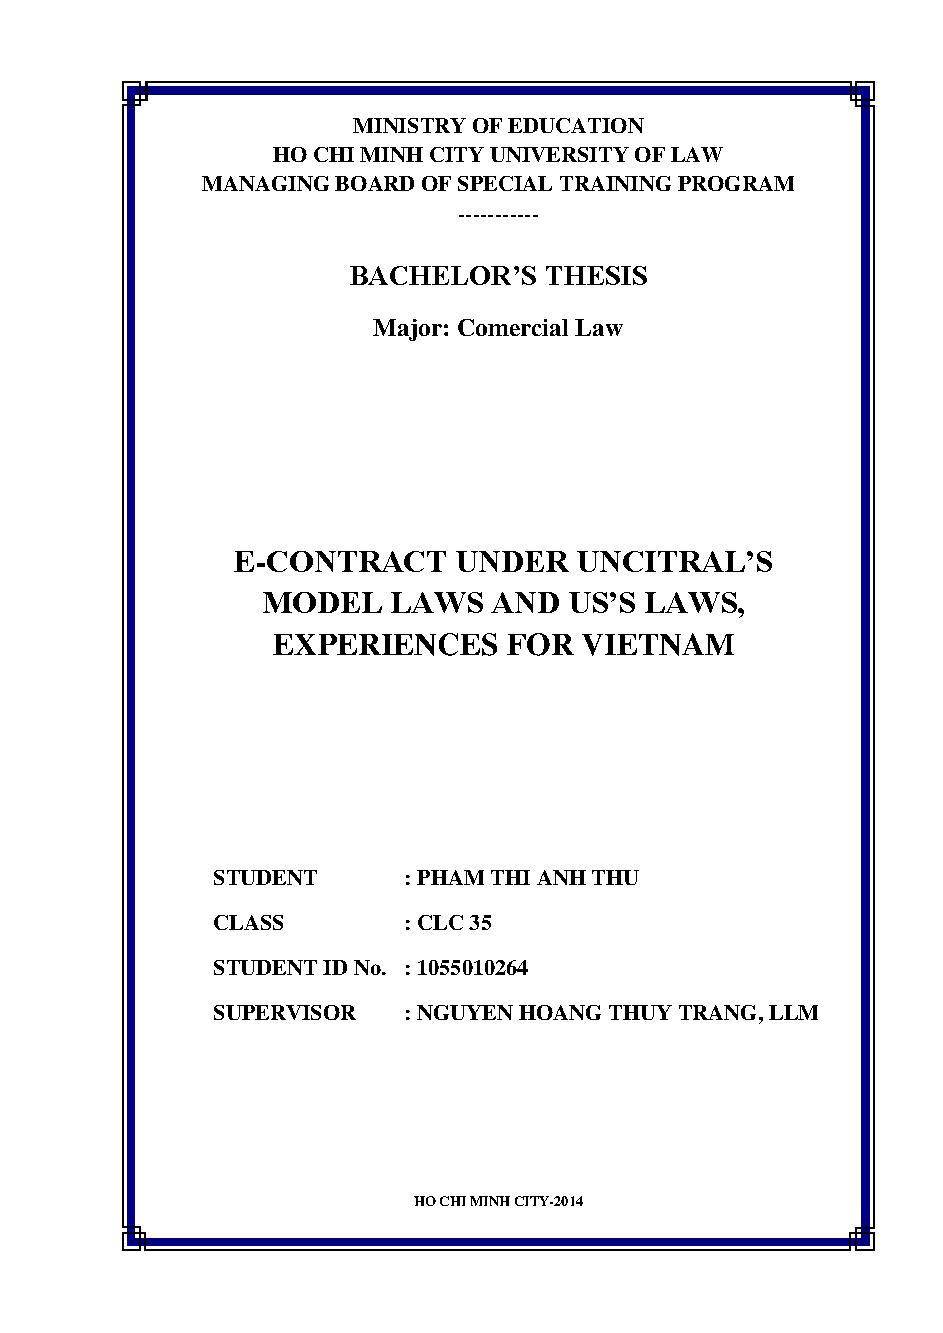 E-Contract under uncitral's model laws and us's laws, experiences for Vietnam